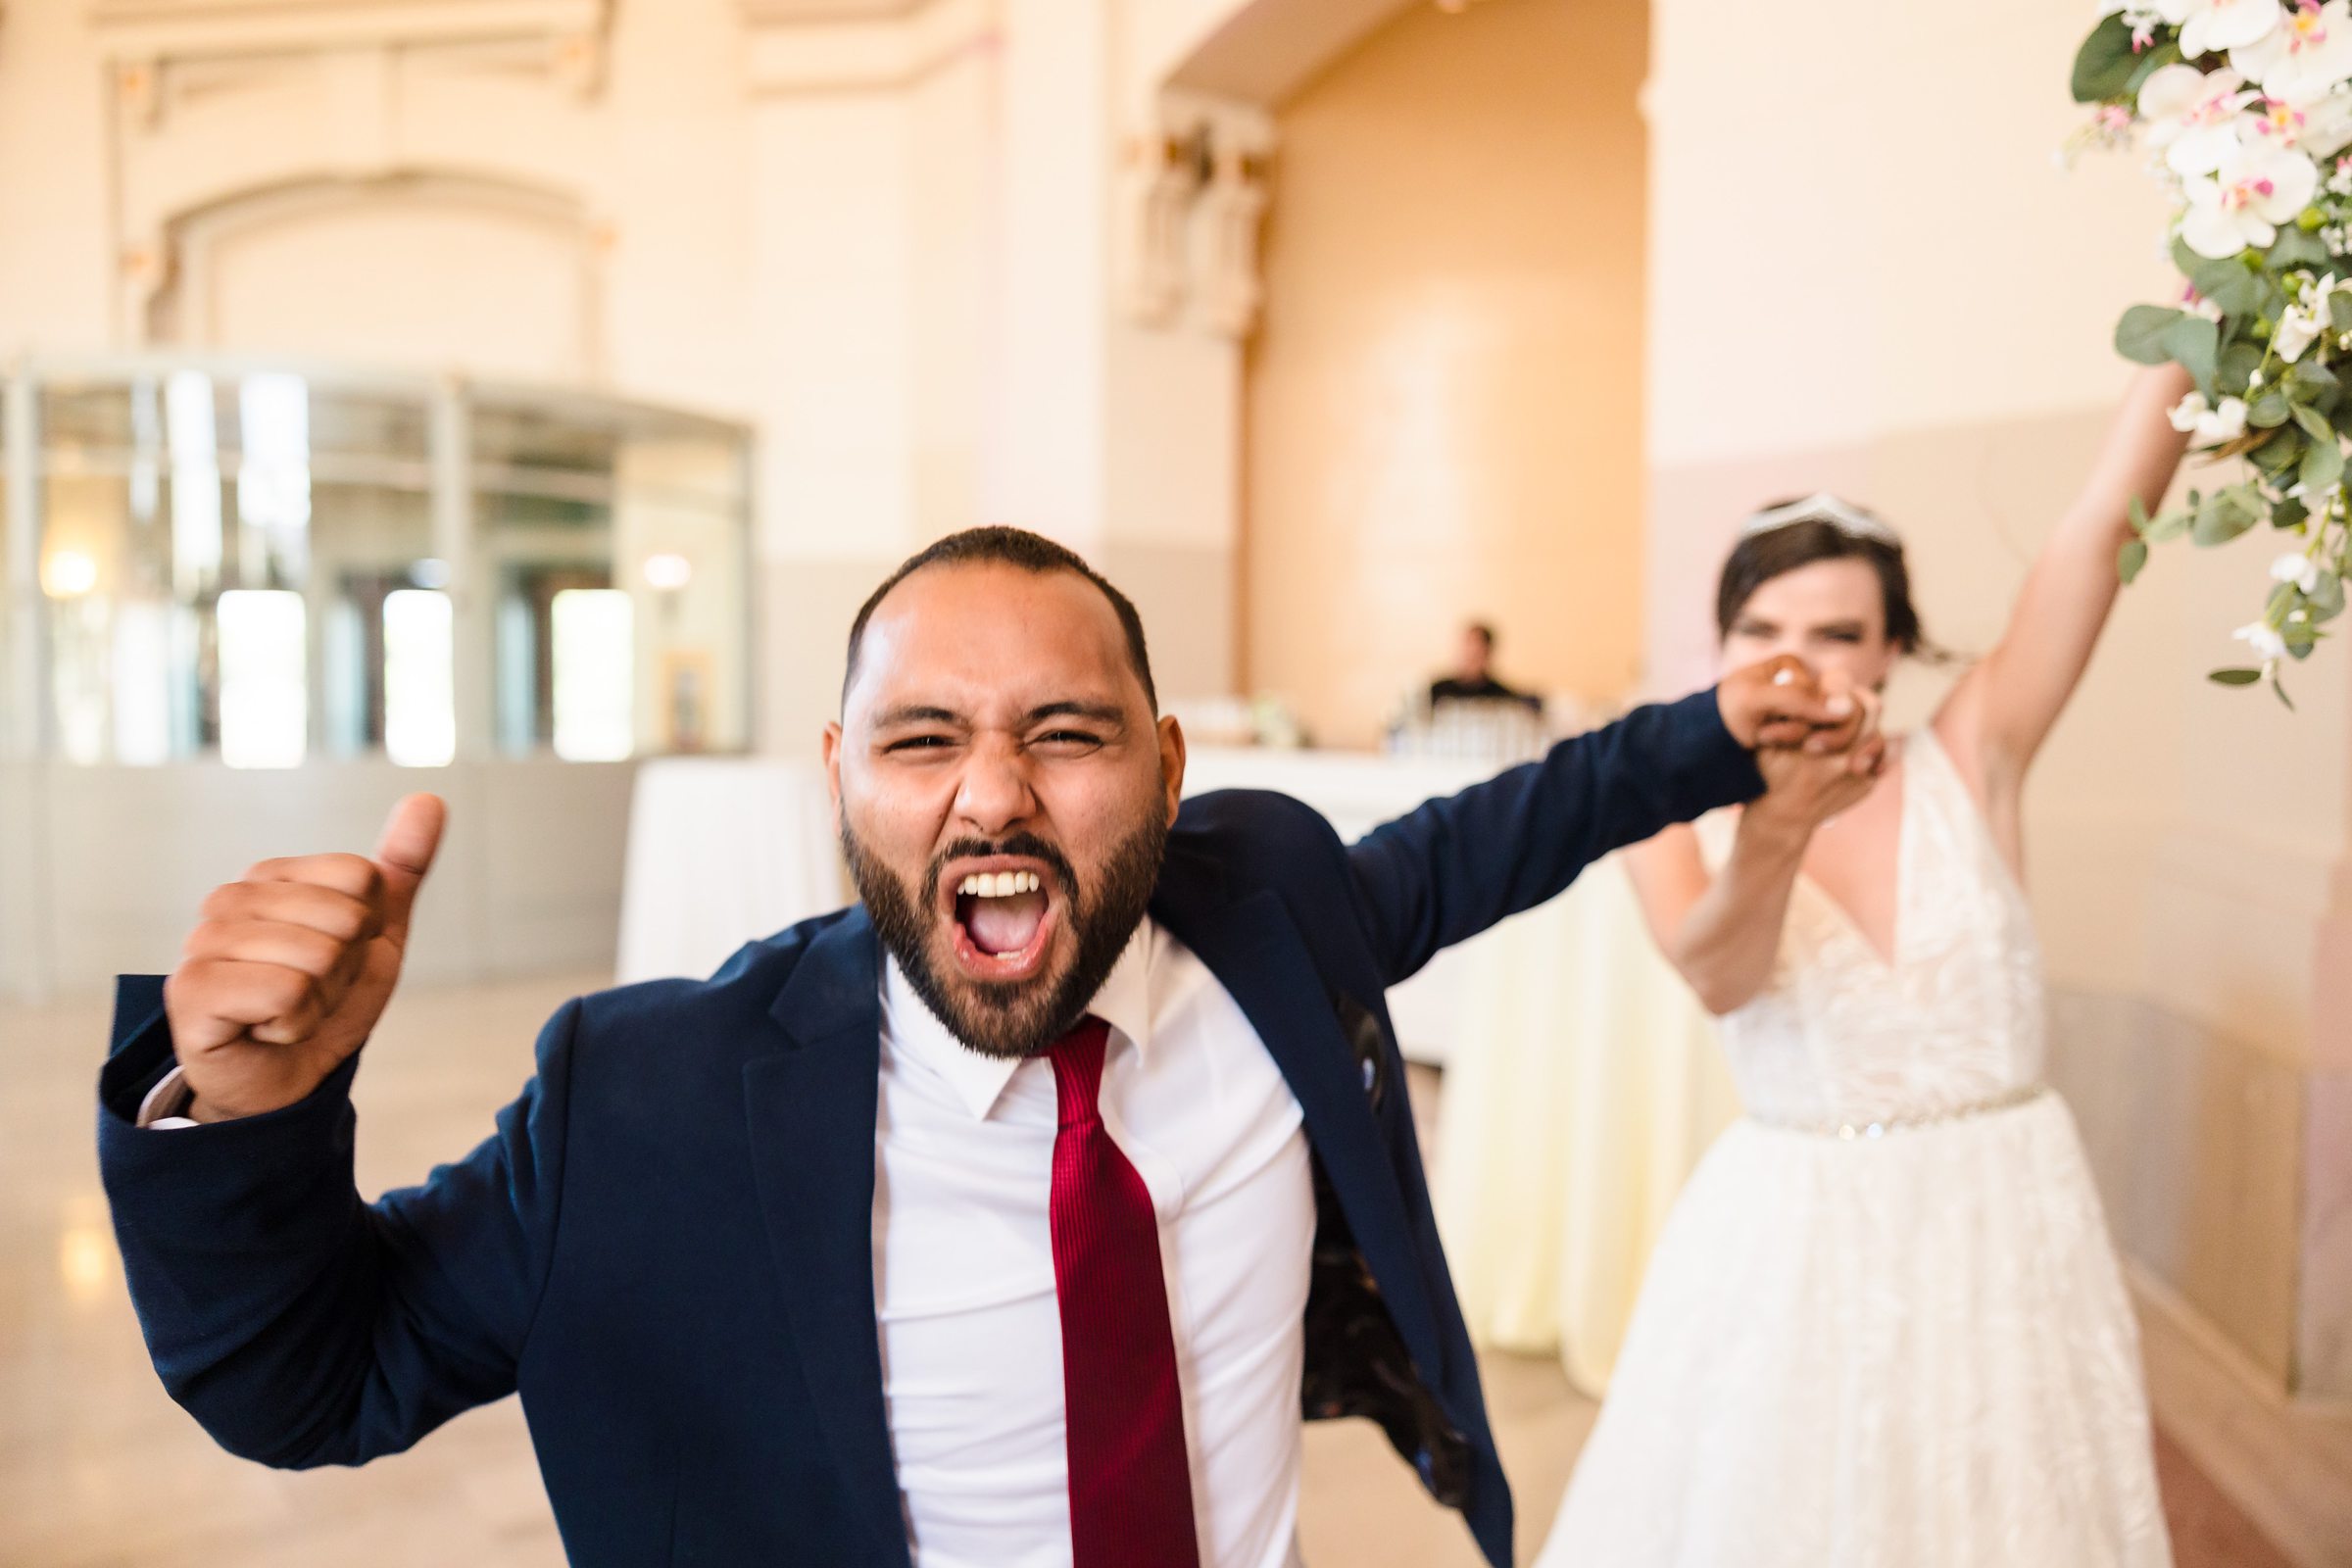 Bride and groom celebrate during their grand enterance at the Union Station in Joliet, Illinois.